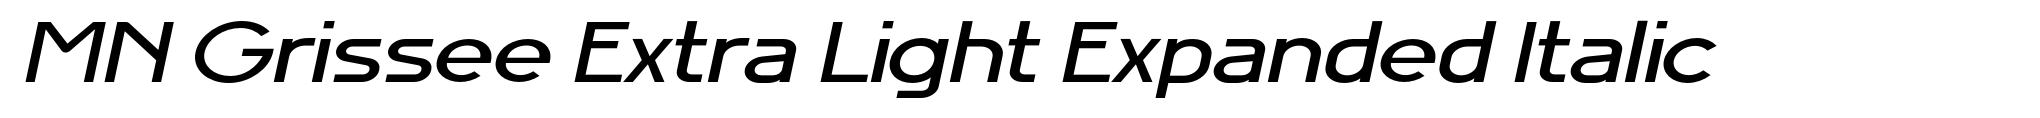 MN Grissee Extra Light Expanded Italic image